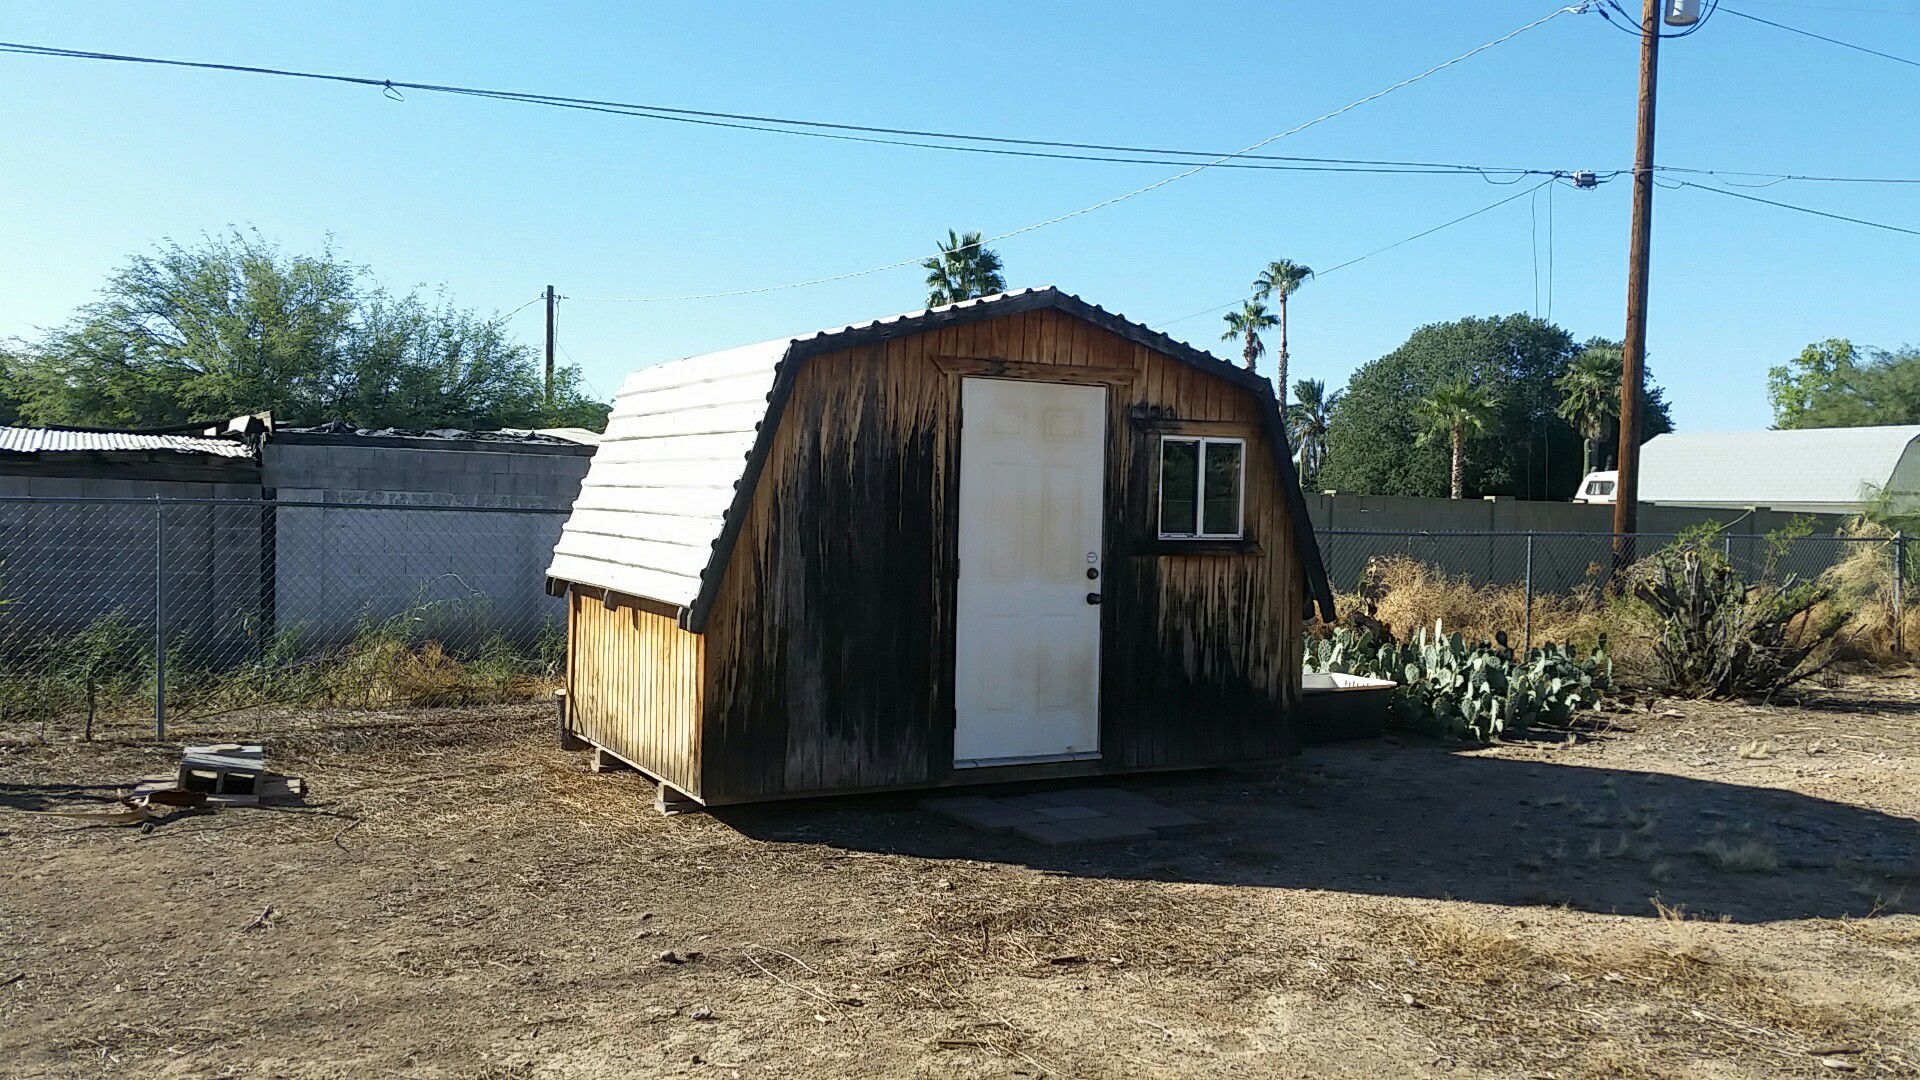 Shed approximately 8 ft x 12 ft